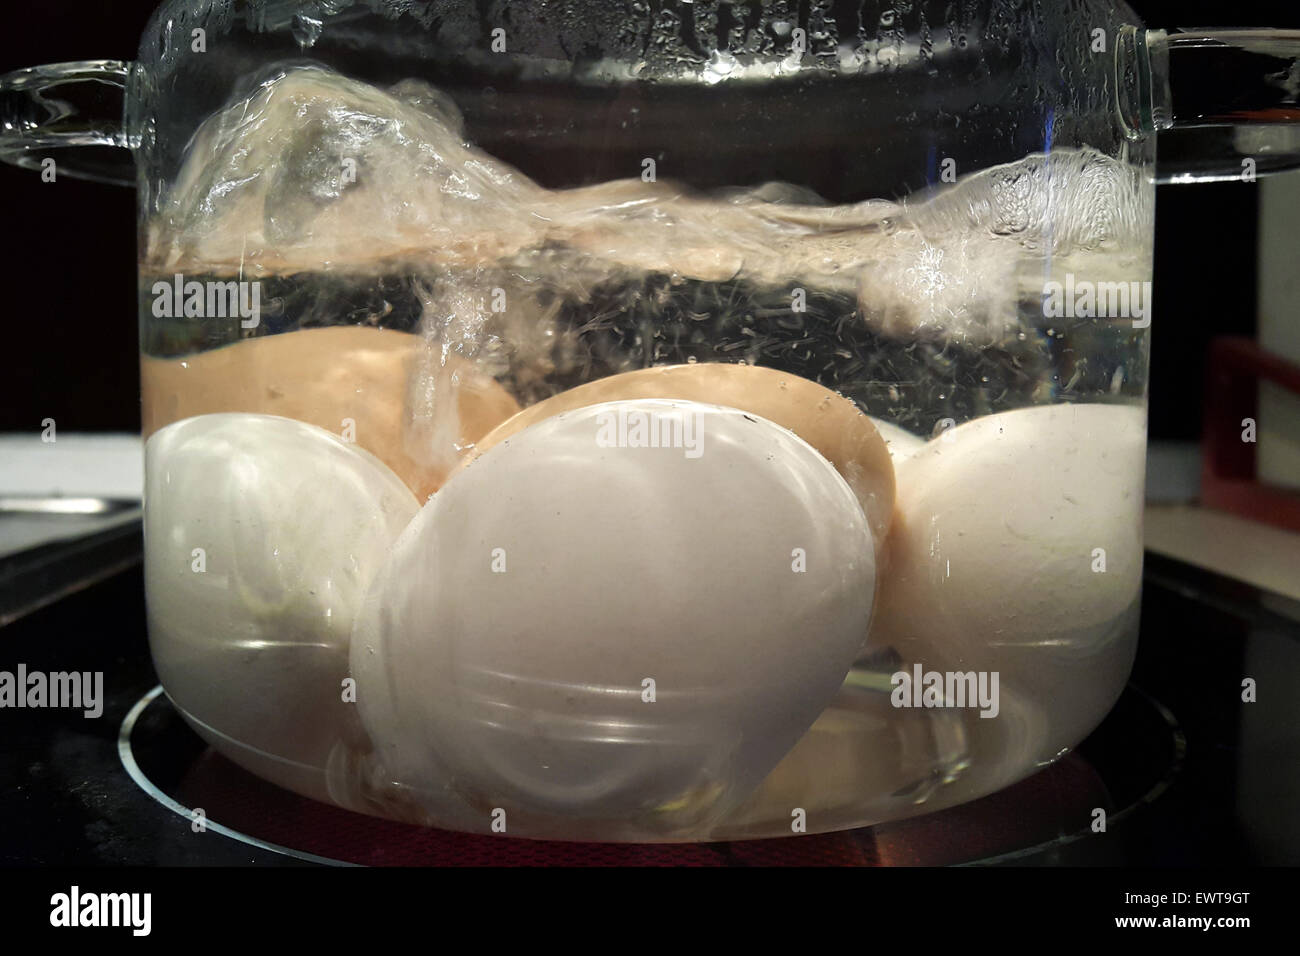 Boiling white and brown eggs in glass saucepan on the kitchen hot plate. Stock Photo